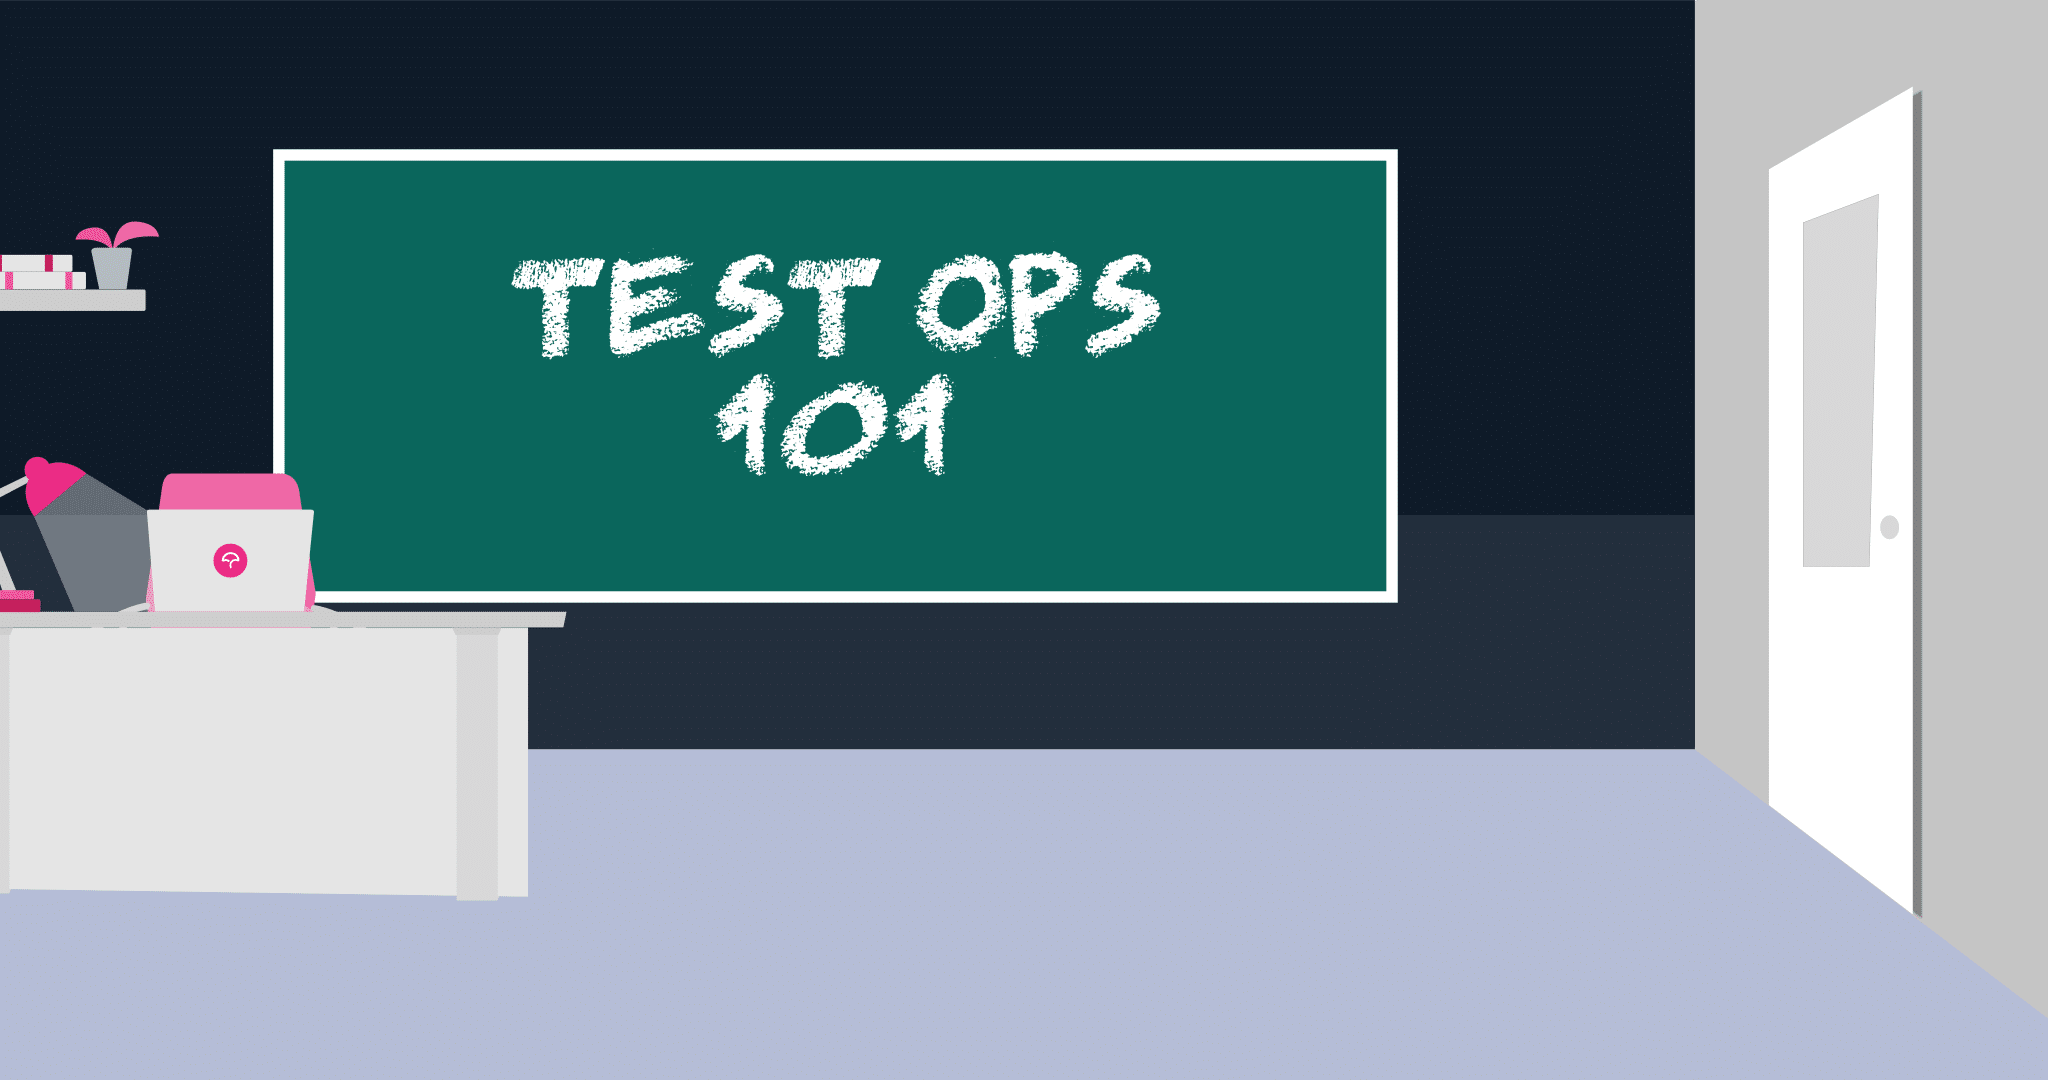 An Introduction to Test Ops